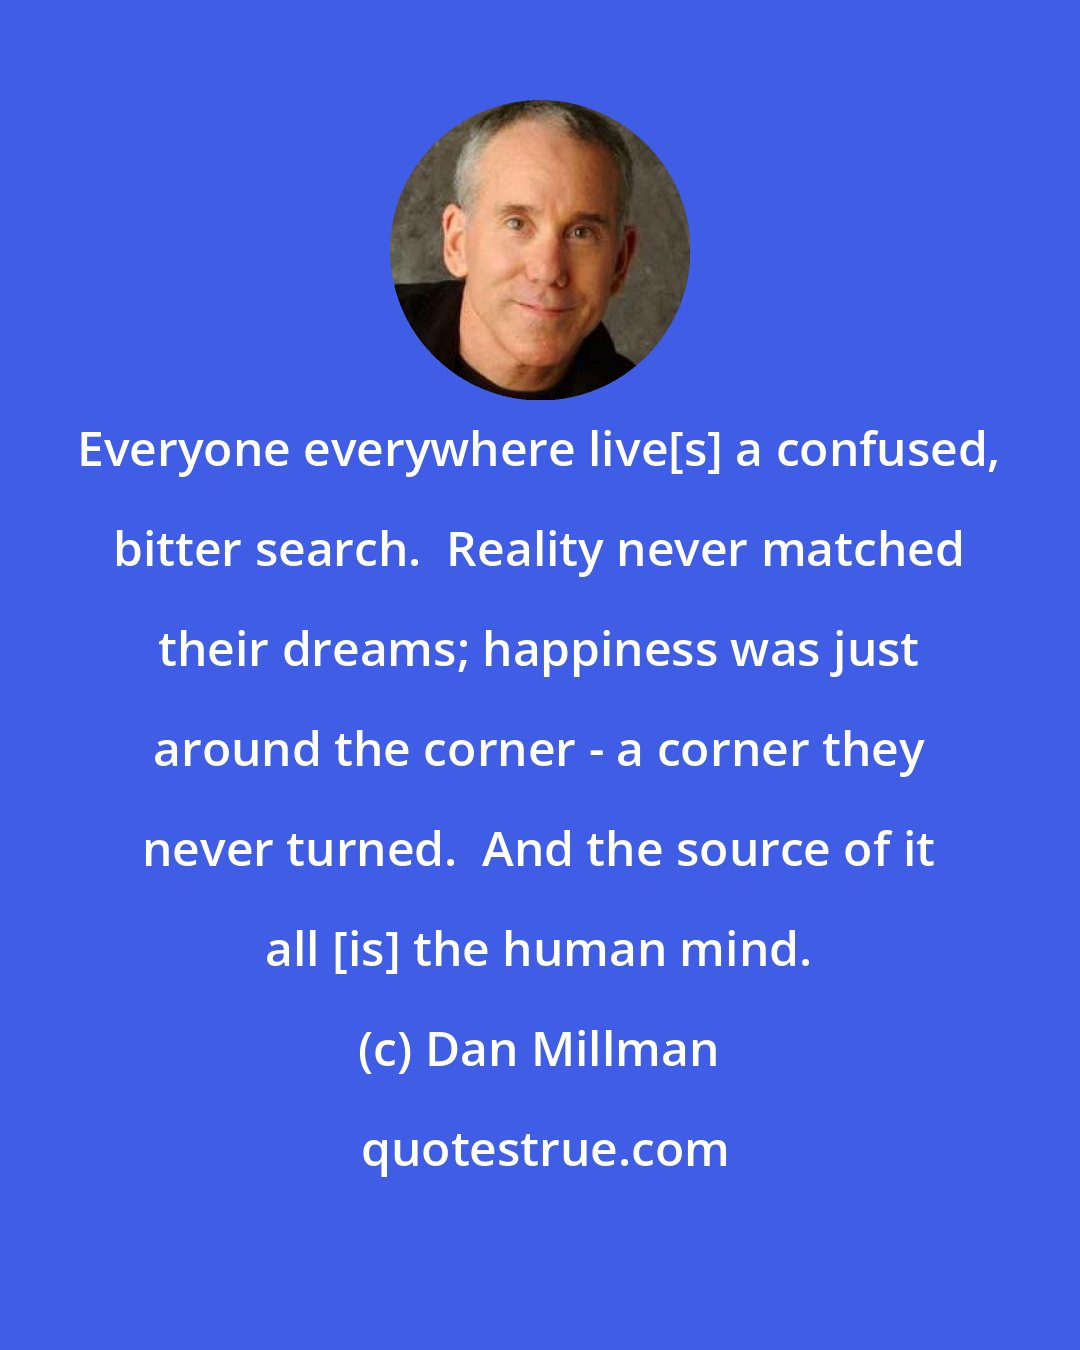 Dan Millman: Everyone everywhere live[s] a confused, bitter search.  Reality never matched their dreams; happiness was just around the corner - a corner they never turned.  And the source of it all [is] the human mind.